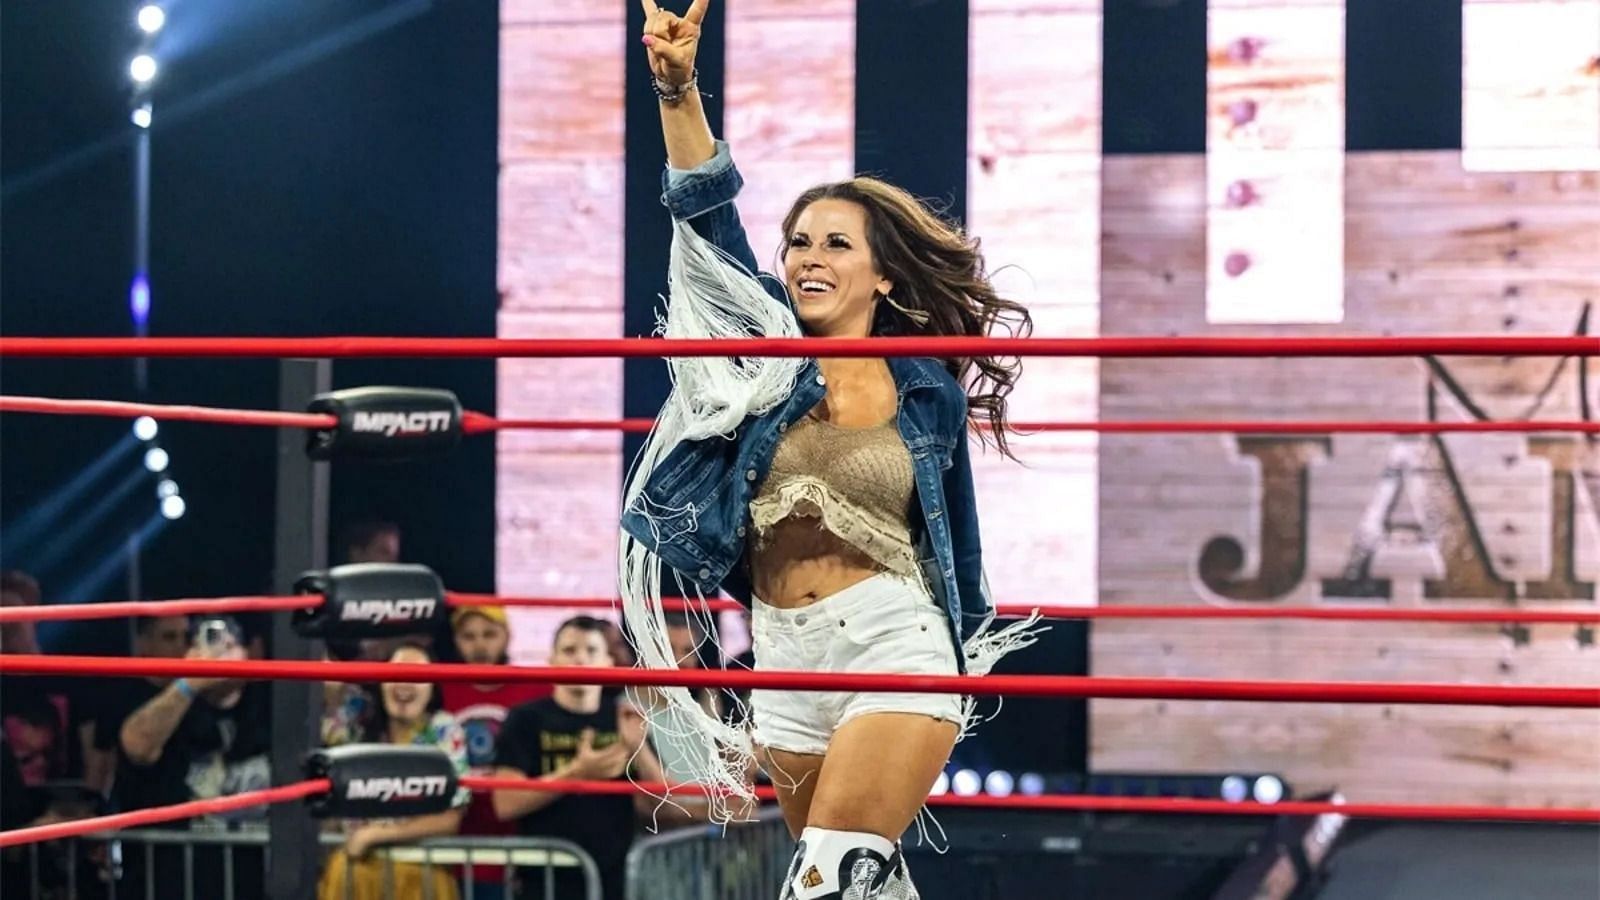 Mickie James will make her in-ring return soon